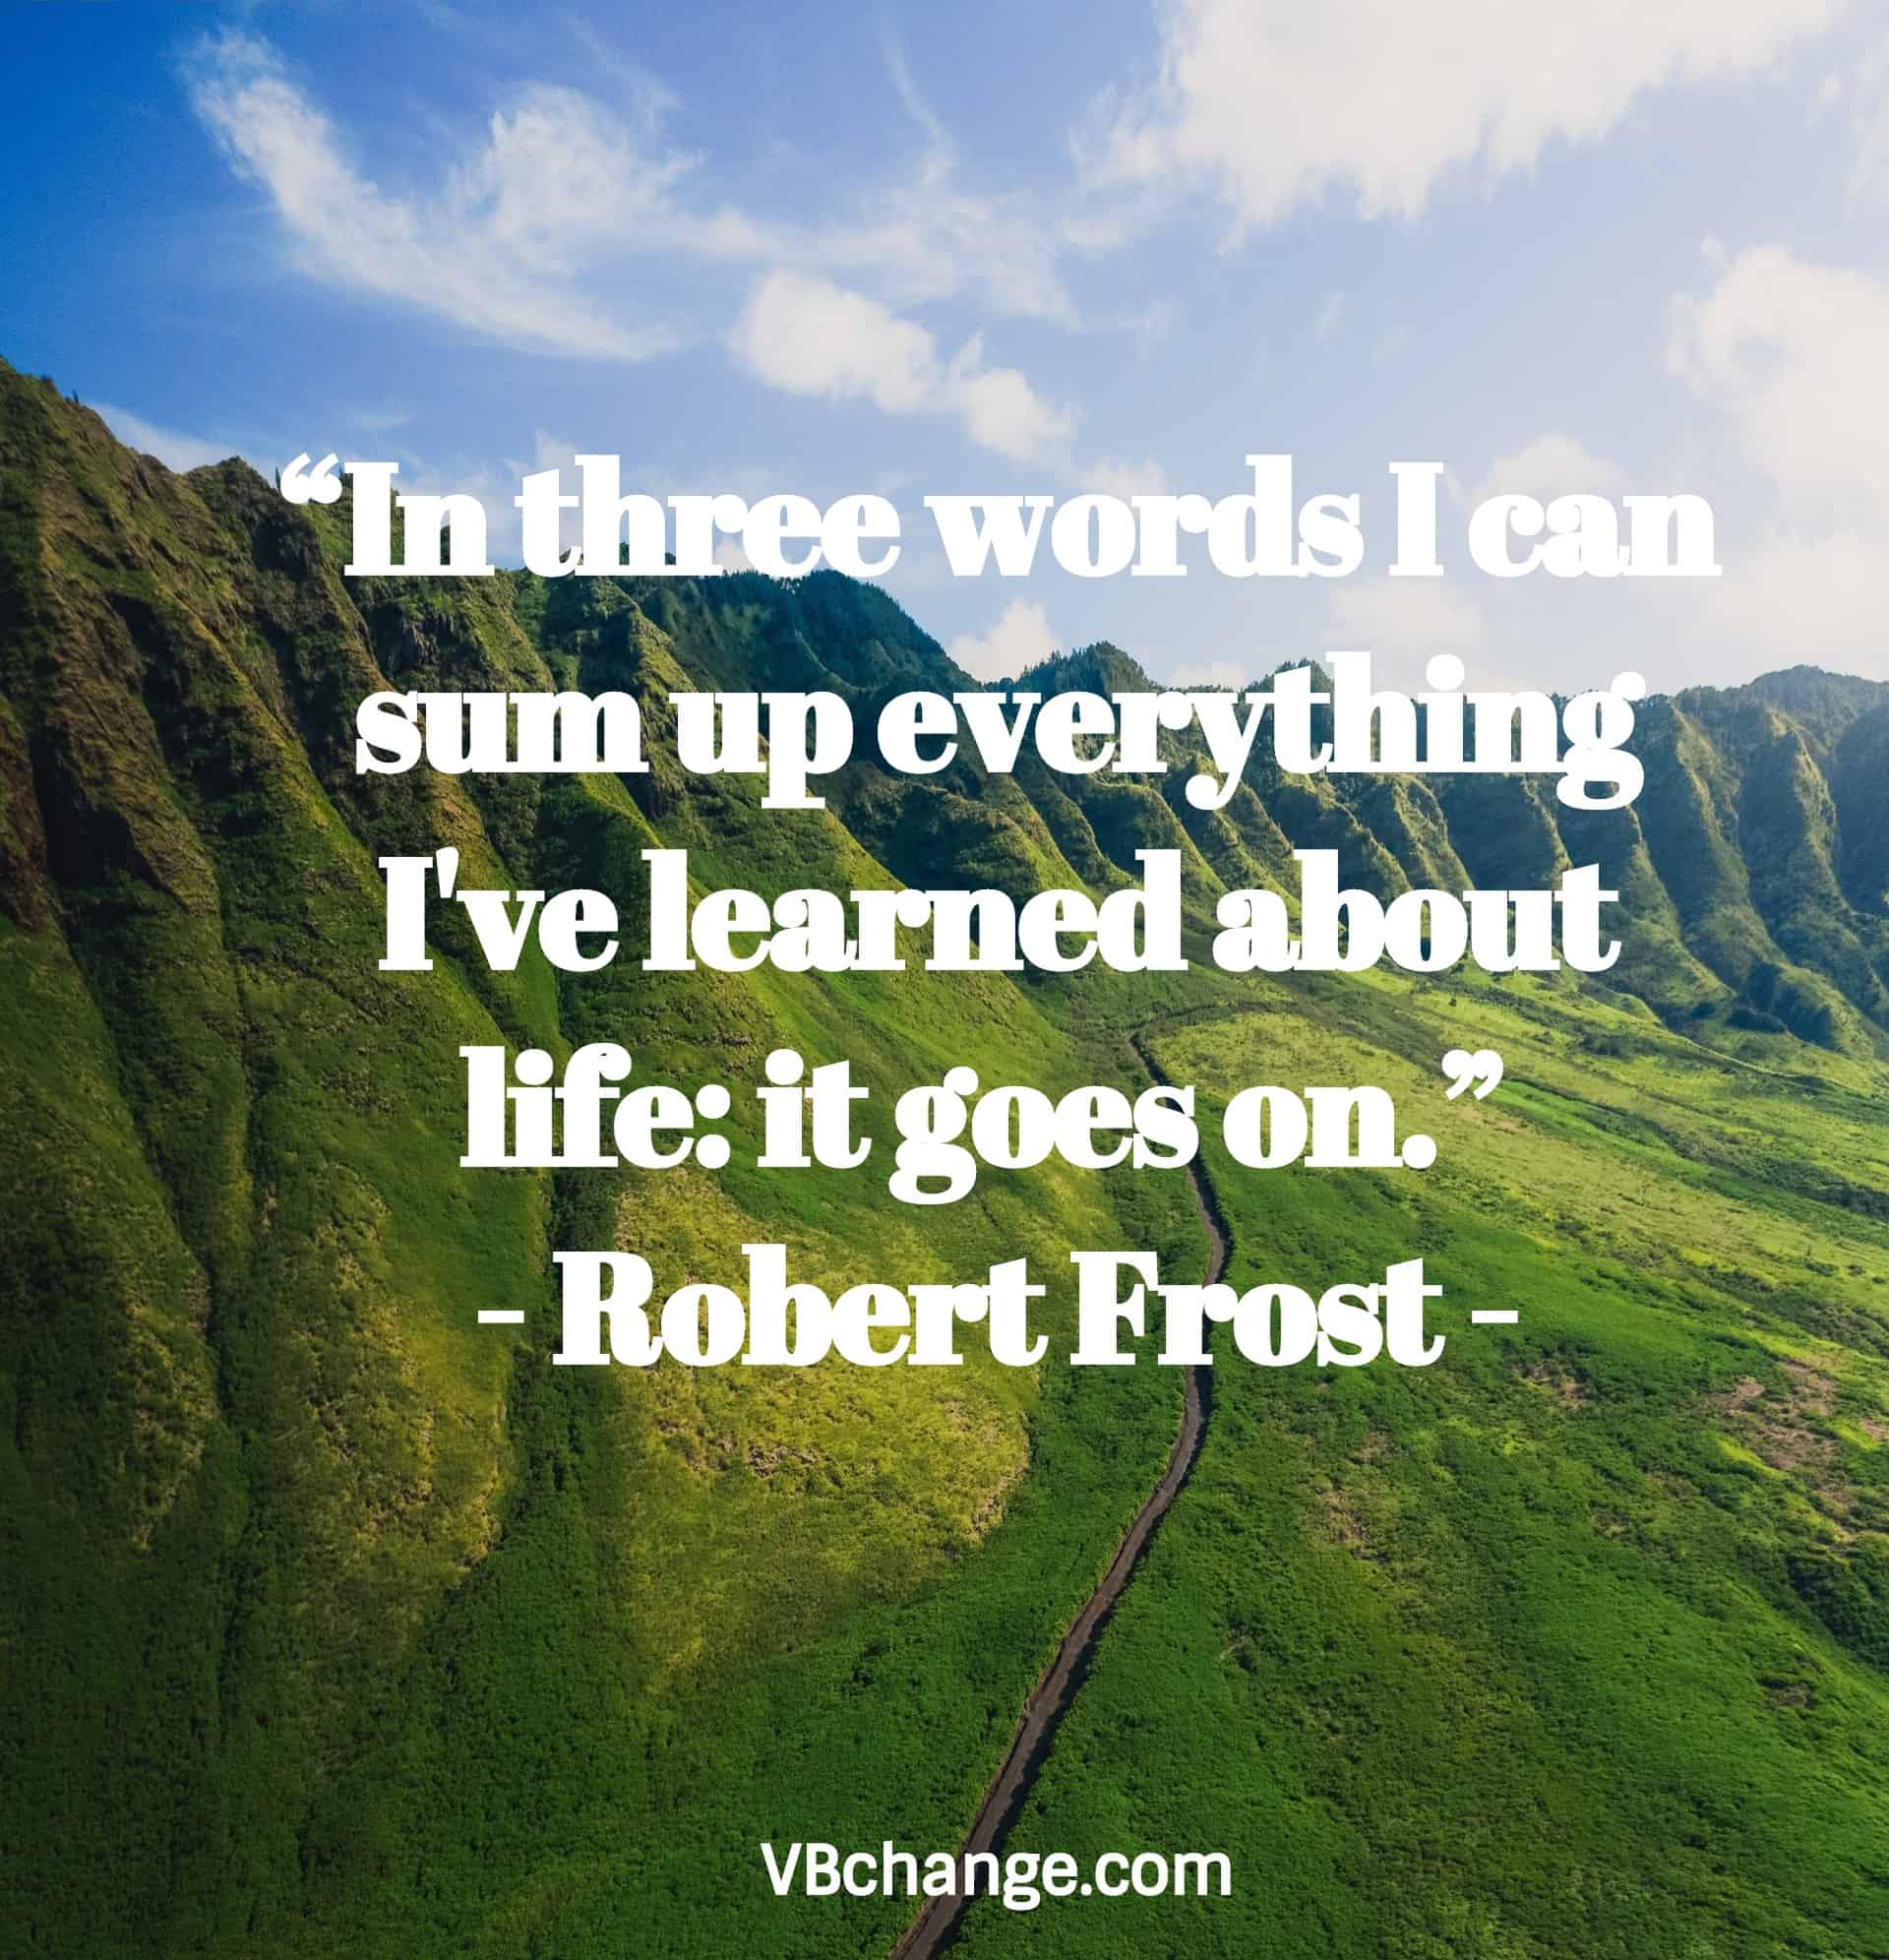 “In three words I can sum up everything I've learned about life: it goes on.” - Robert Frost